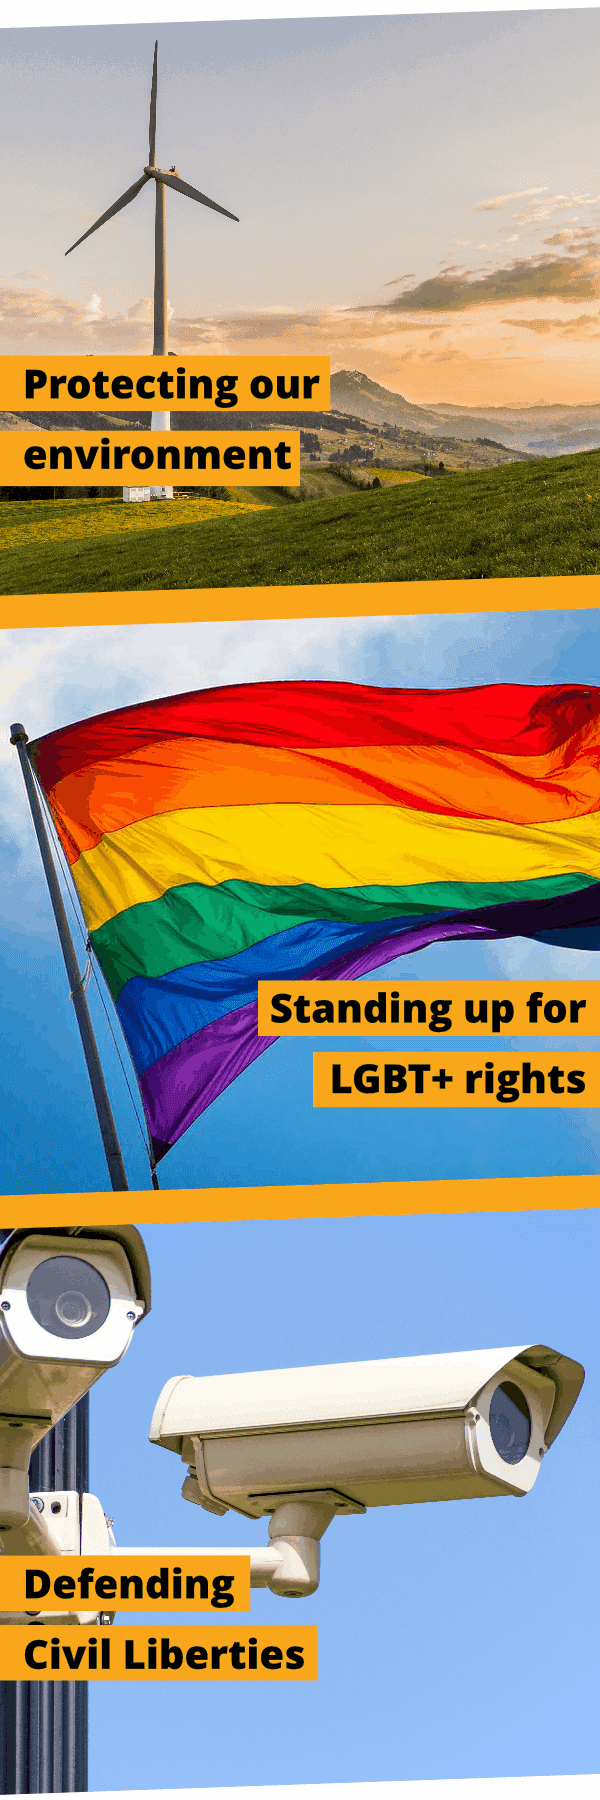 Protecting our environment, standing up for LGBT+ rights and
defending civil liberties.